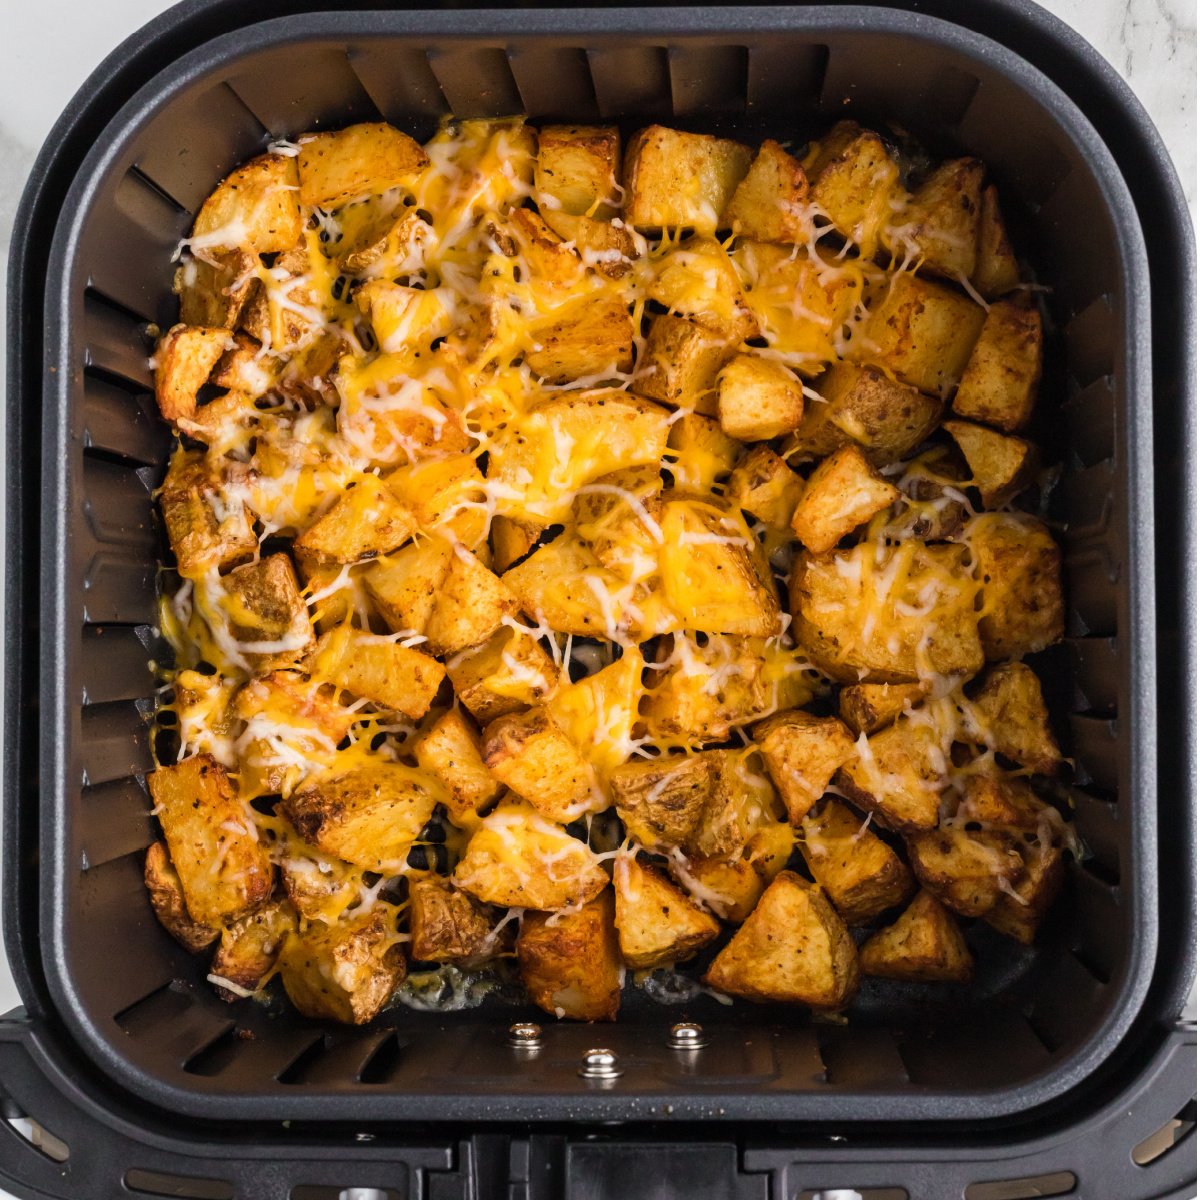 Cheesy potatoes in the basket of the air fryer.